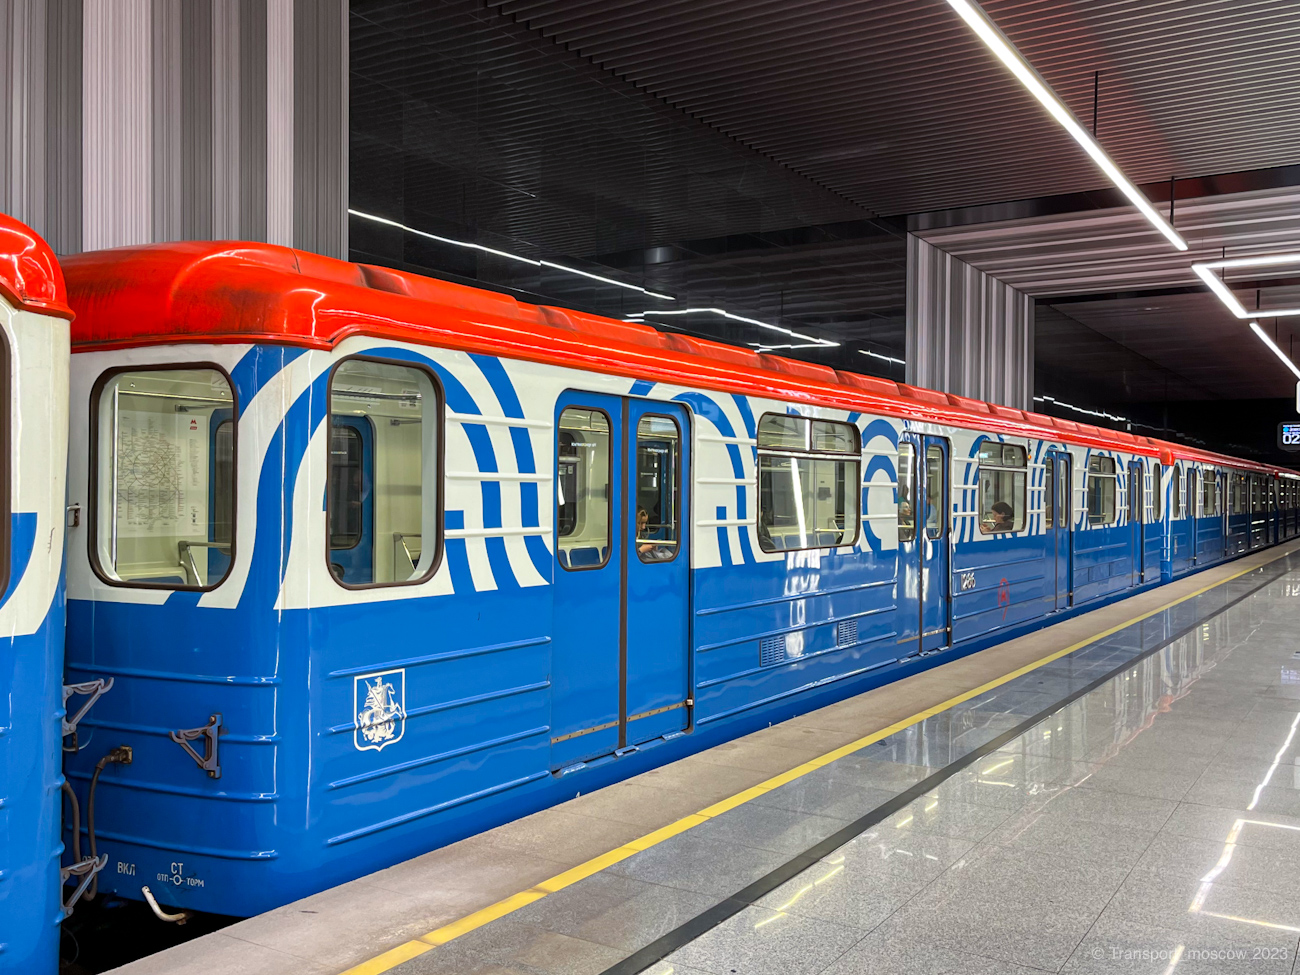 Moskwa, 81-714.5М (MVM) Nr 1286; Moskwa — 88 year Moscow metro anniversary Parade and exhibition of metro cars on 13/05/2023 — 16/05/2023